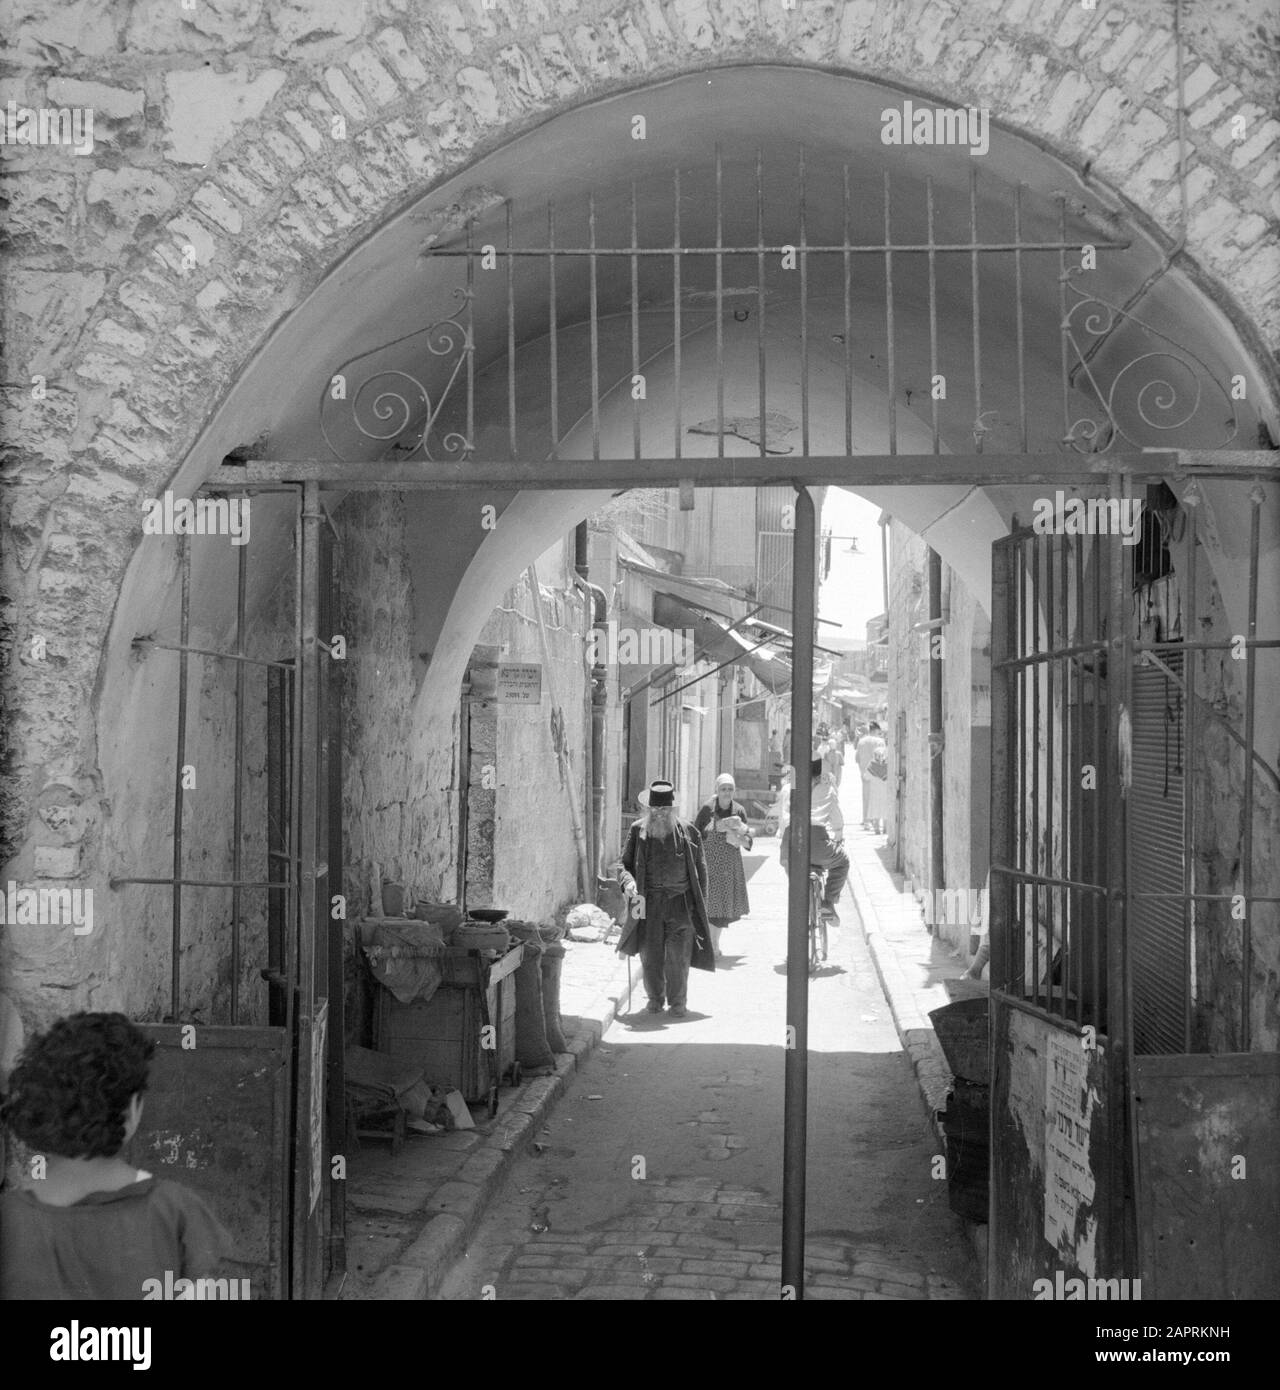 Israel 1964-1965: Jerusalem (Jerusalem), Mea Shearim  Gateway through the gate with daily activity Annotation: Mea Shearim, also called Meah Shearim or a hundred gates, is one of the oldest districts of Jerusalem. It was built from about 1870 by Hasidic Jews who lived in the Old Town until then. However, there was too little space and so they bought a piece of land northwest of the city. This land, a swamp area, was cultivated into land to build a new neighborhood: Meah Shearim. The district is known anno 2012 as the most extreme orthodox Jewish quarter in the world and is home to several Hasi Stock Photo